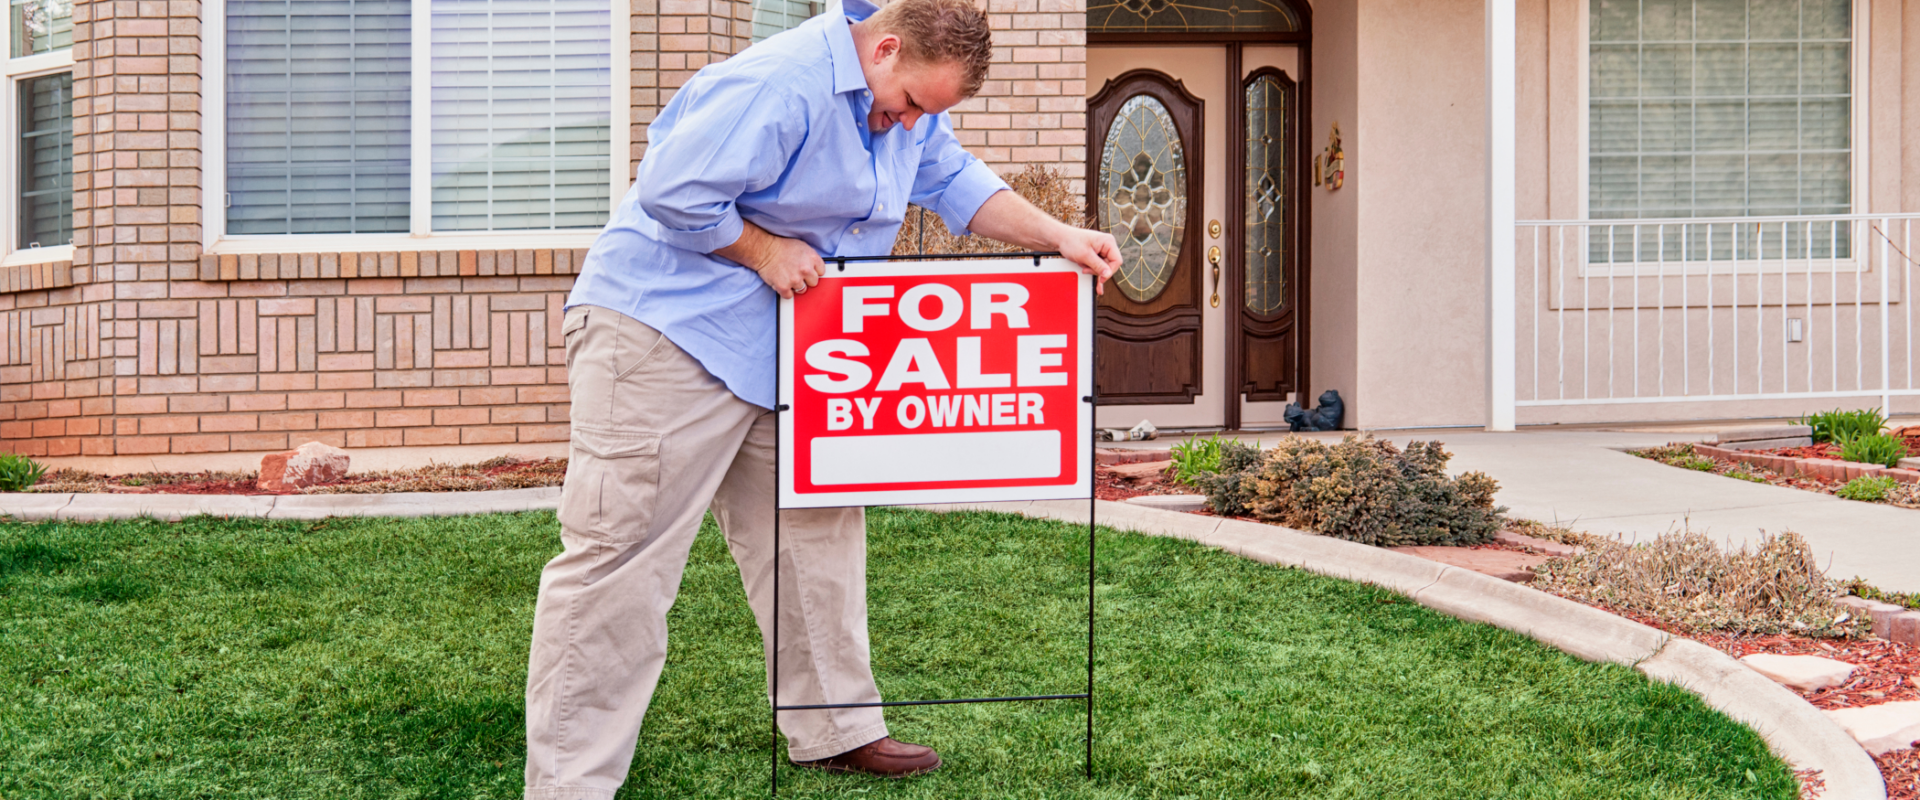 Homeowner placing a 'For Sale By Owner' sign on the front lawn of a Cincinnati suburb home